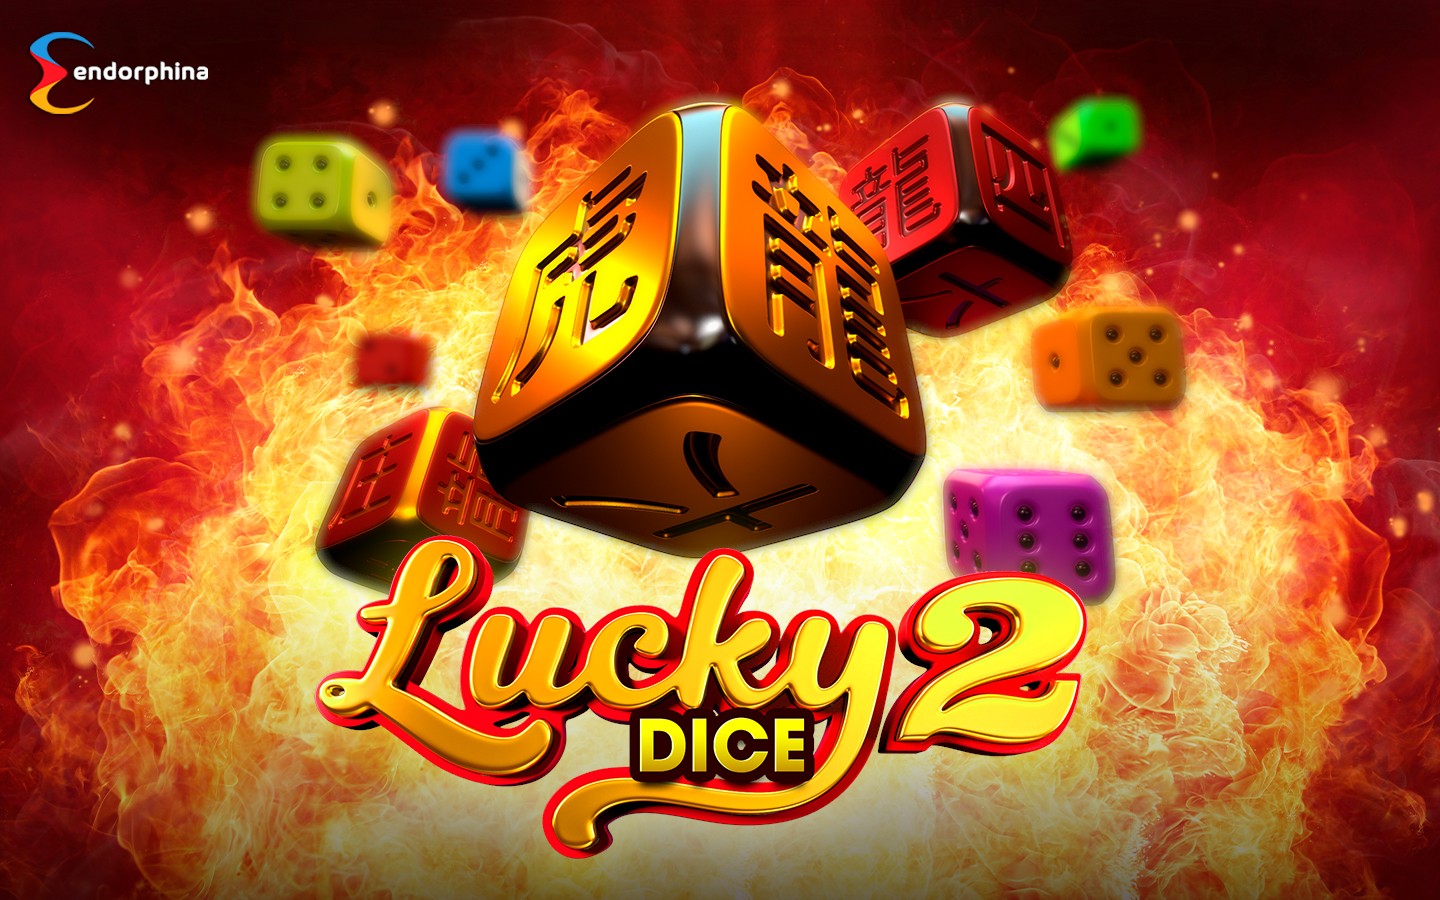 Lucky 88 Dice Feature, short and sweet!